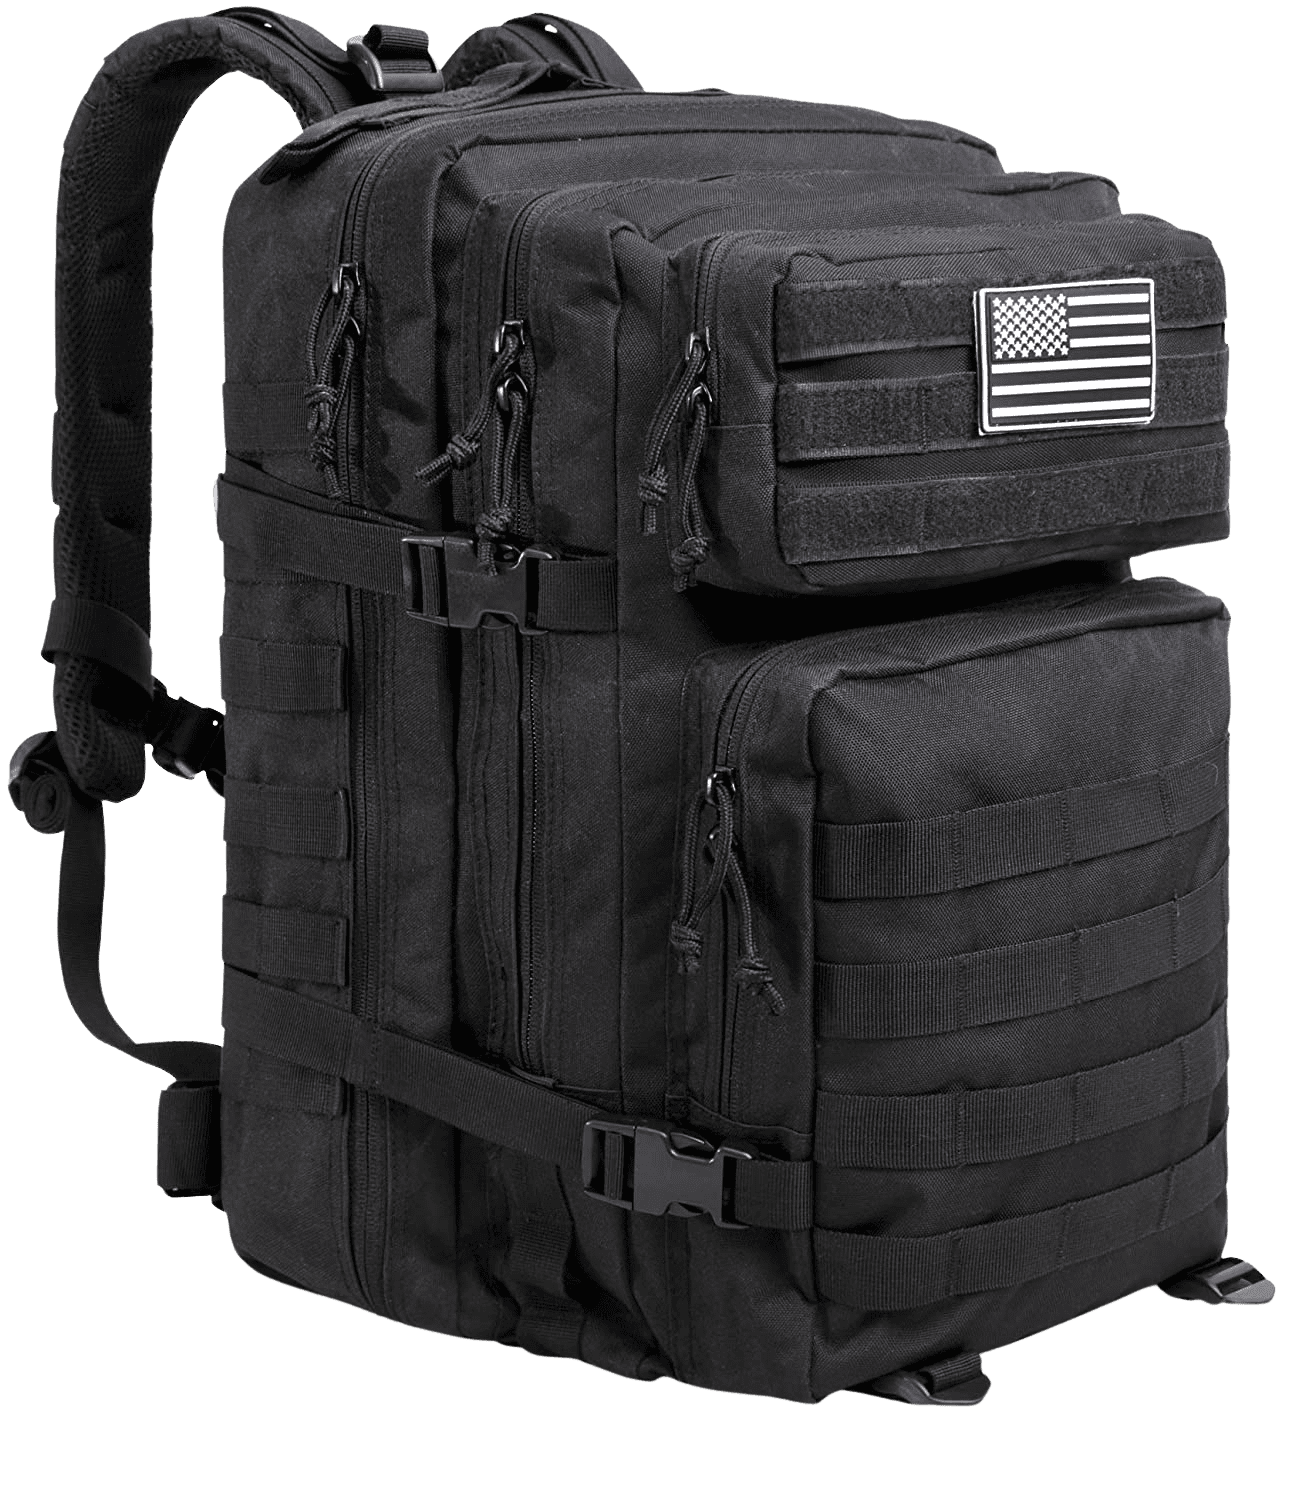 VALADIUM Tactical Military Tactical Backpack 45L 3 Day Assault Military Tactical Backpack with Molle System. Military Tactical Operations Bug Out Bag - Home Decor Gifts and More